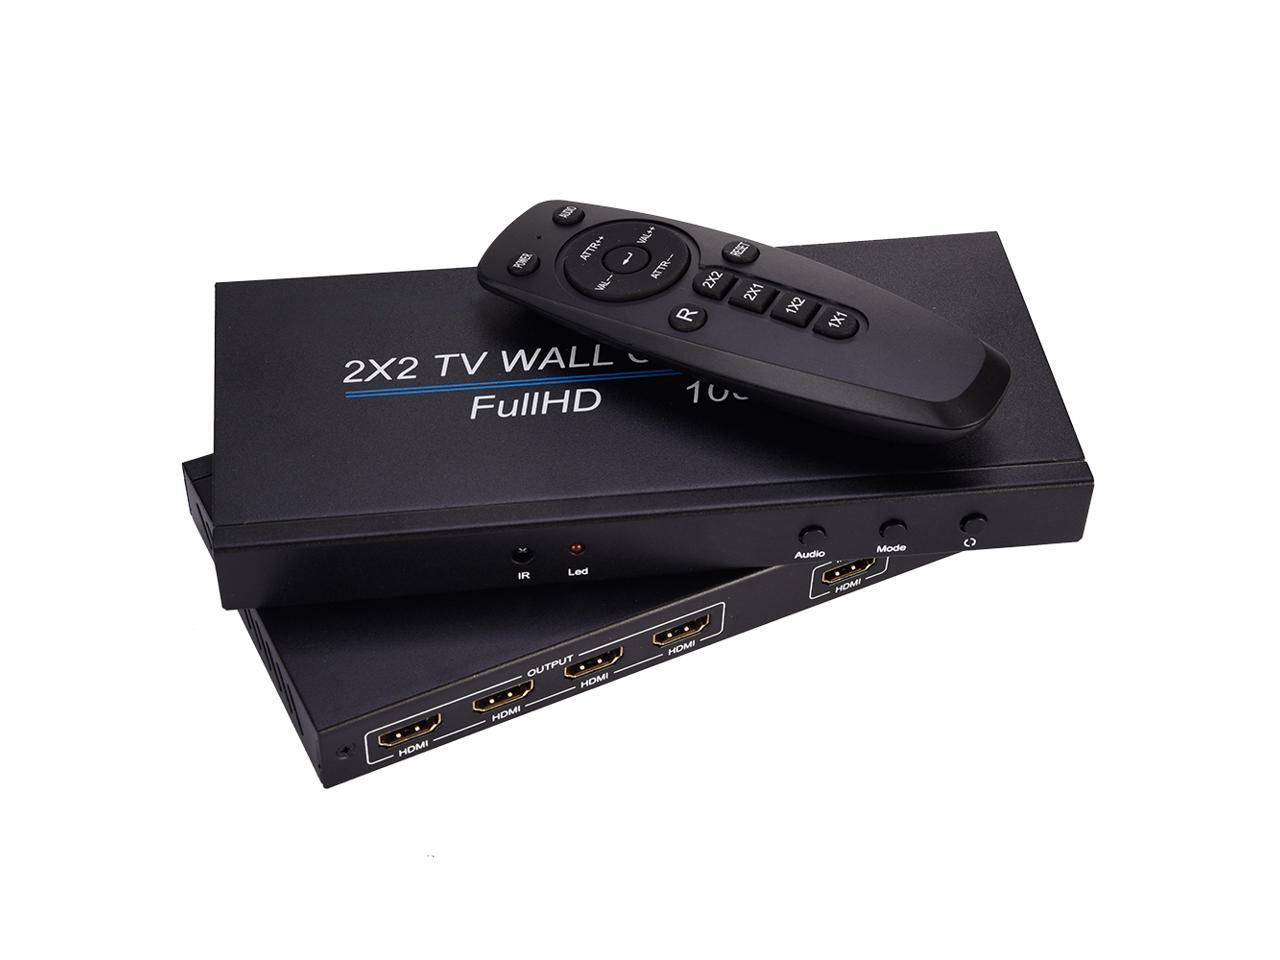 2x2 4 Channel Video Wall Controller HDMI Outputs Processor MPG Multi-format 